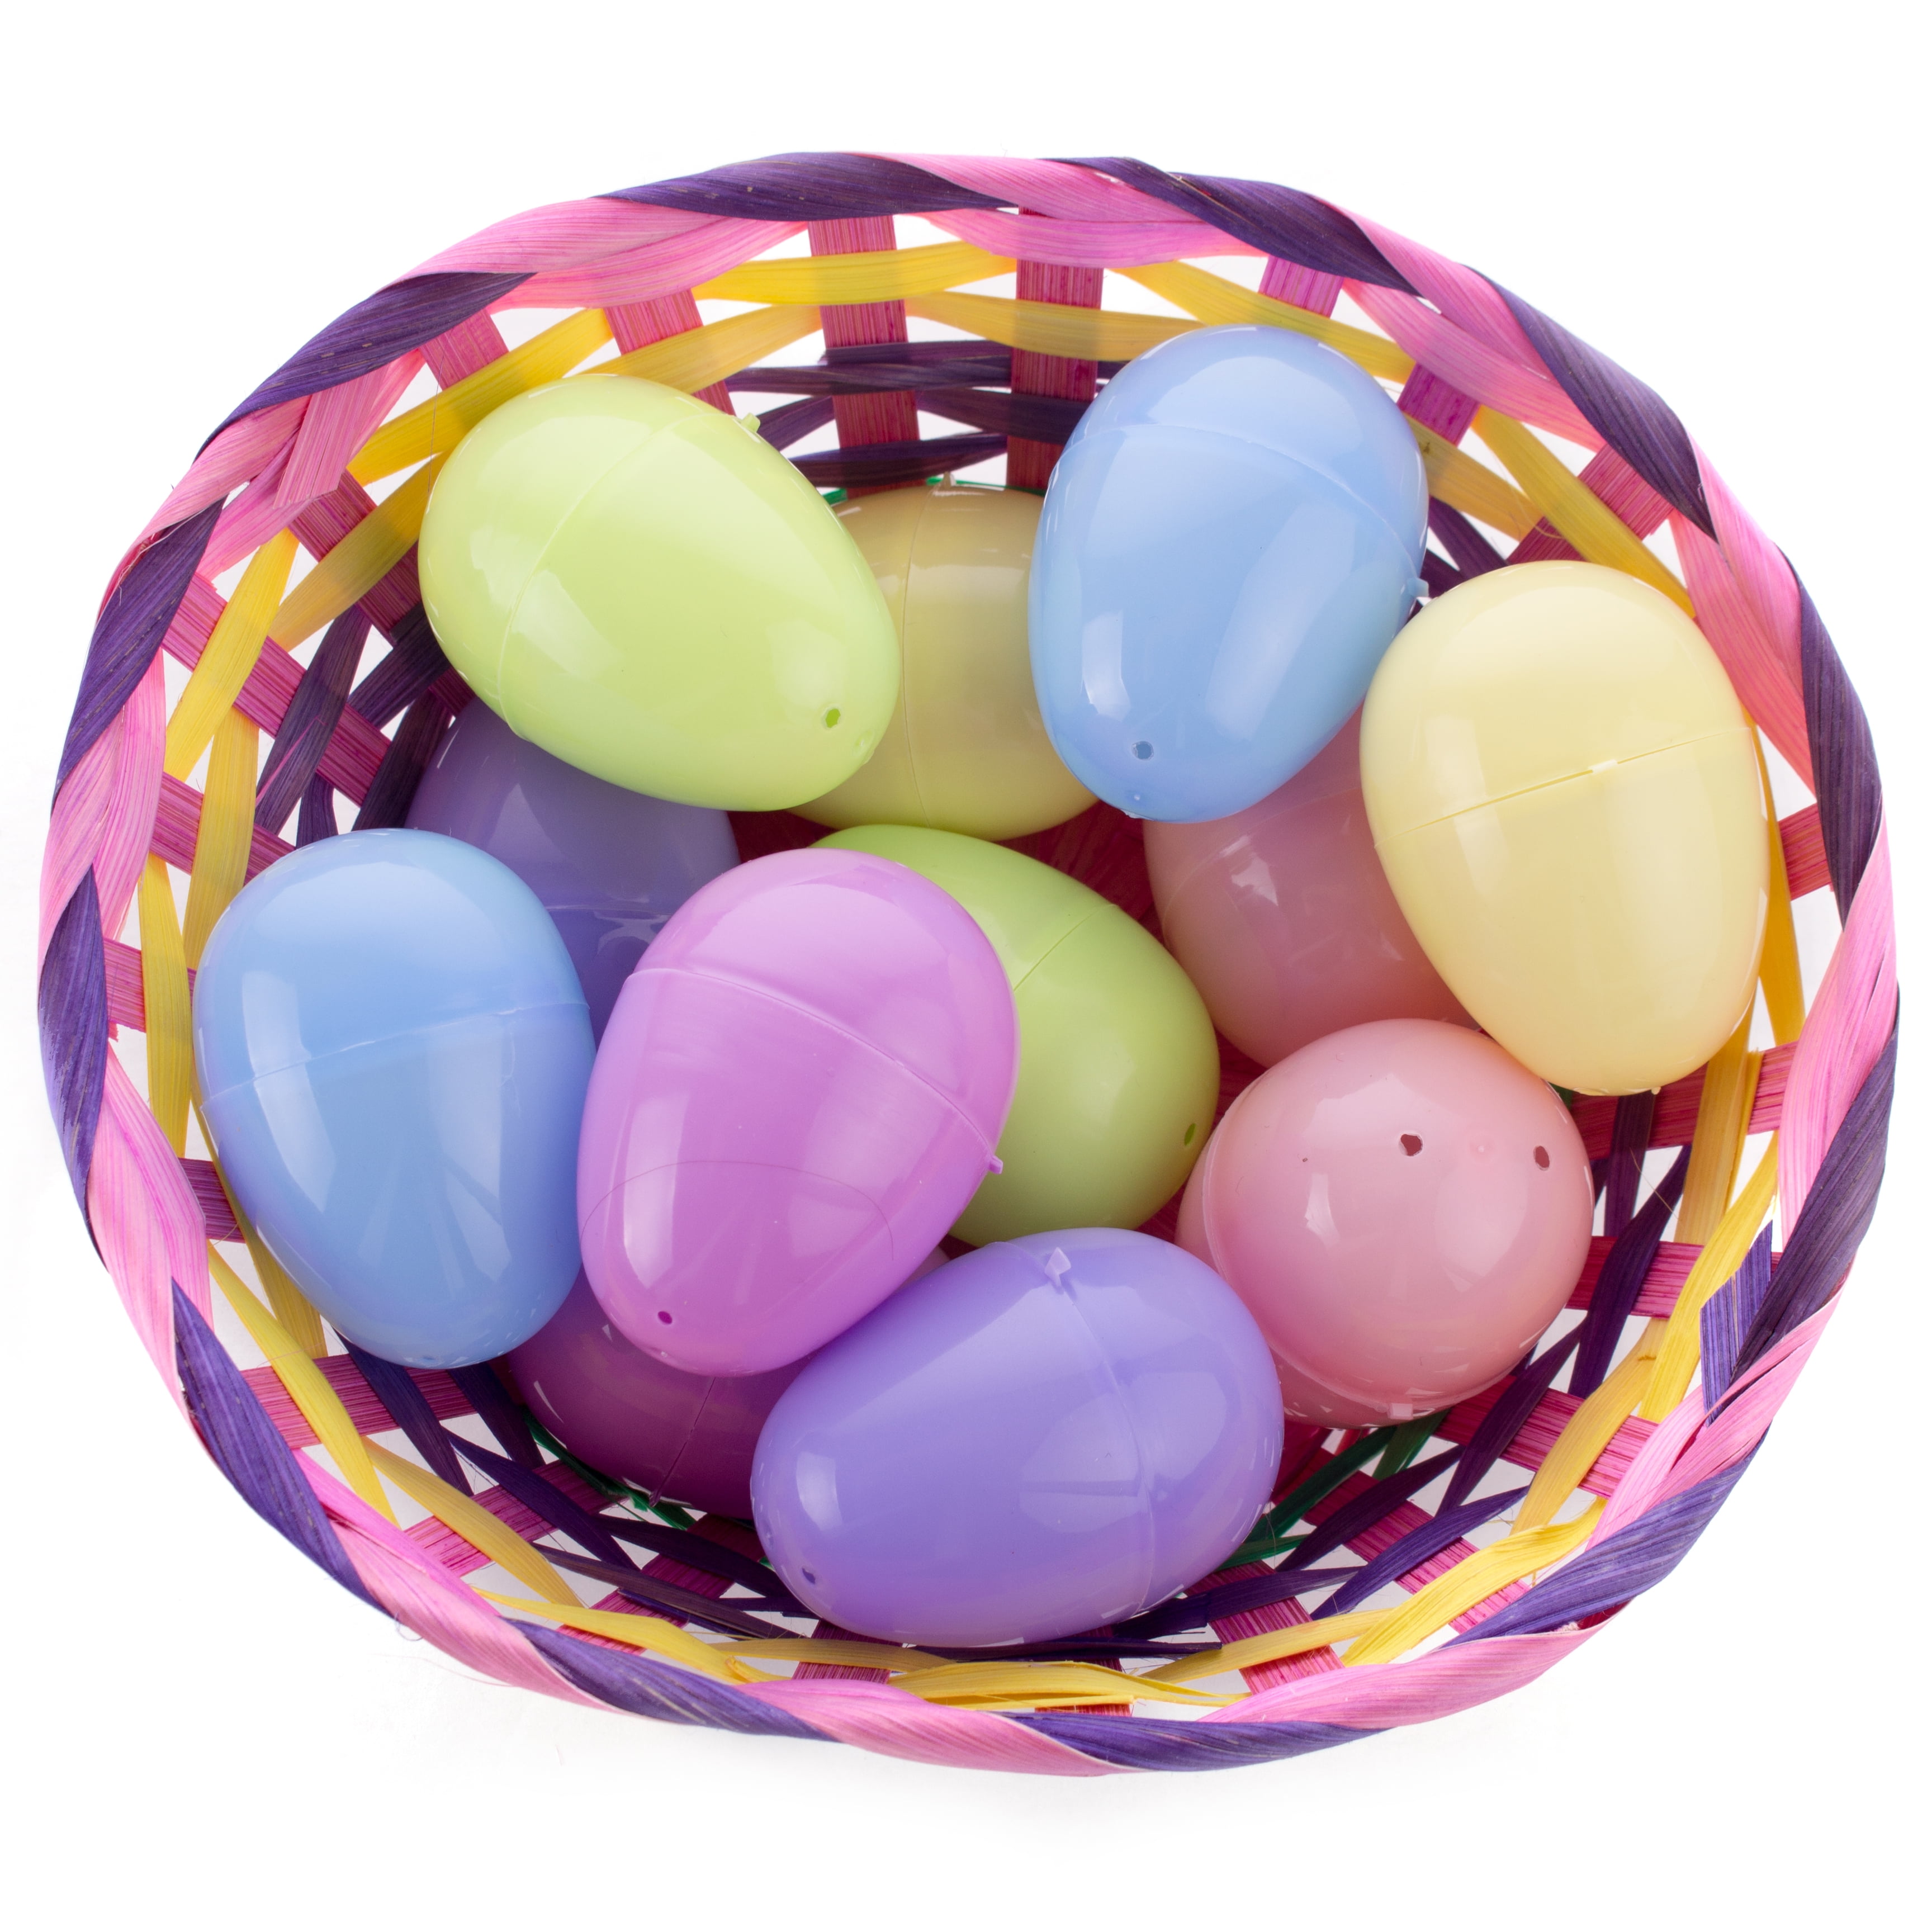 24 EMPTY YELLOW PLASTIC EASTER VENDING EGGS 2.25 INCH BEST PRICE FASTEST SHIP!! 